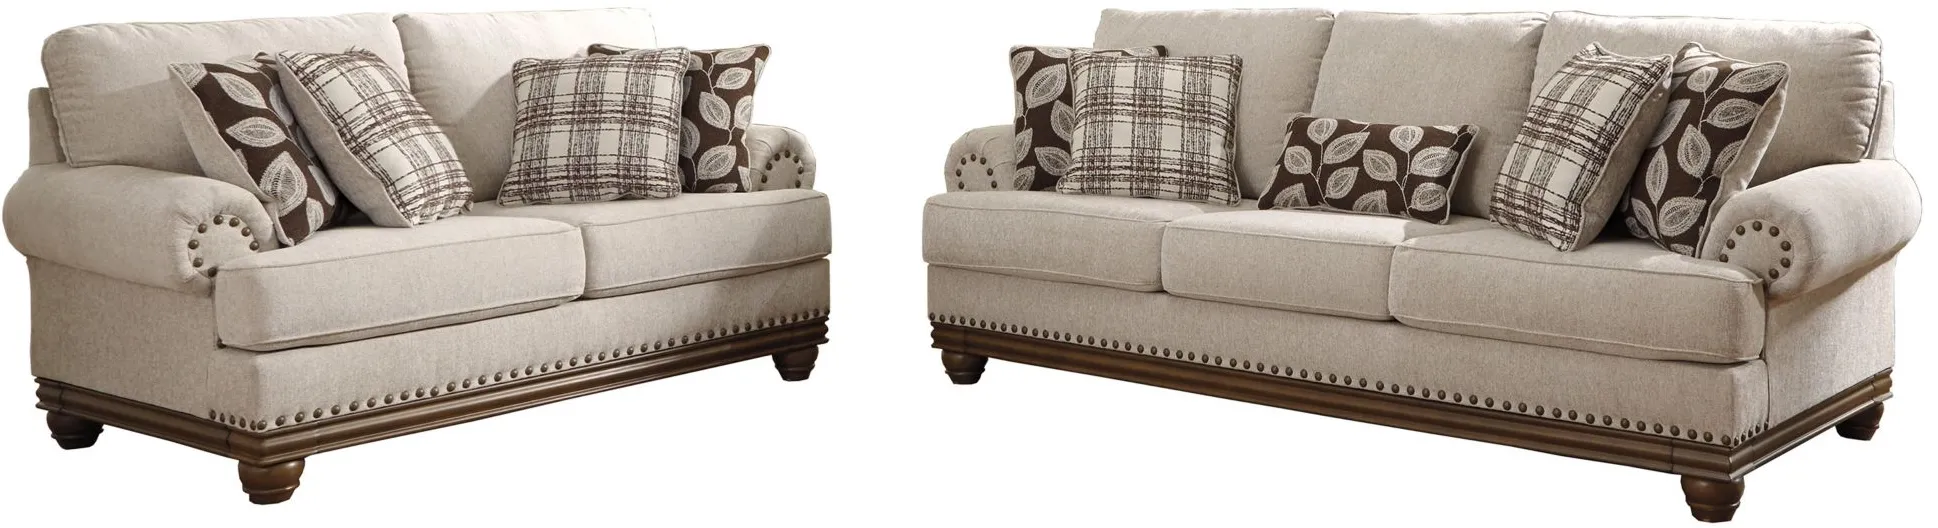 Harleson Sofa and Loveseat Set in Wheat by Ashley Furniture